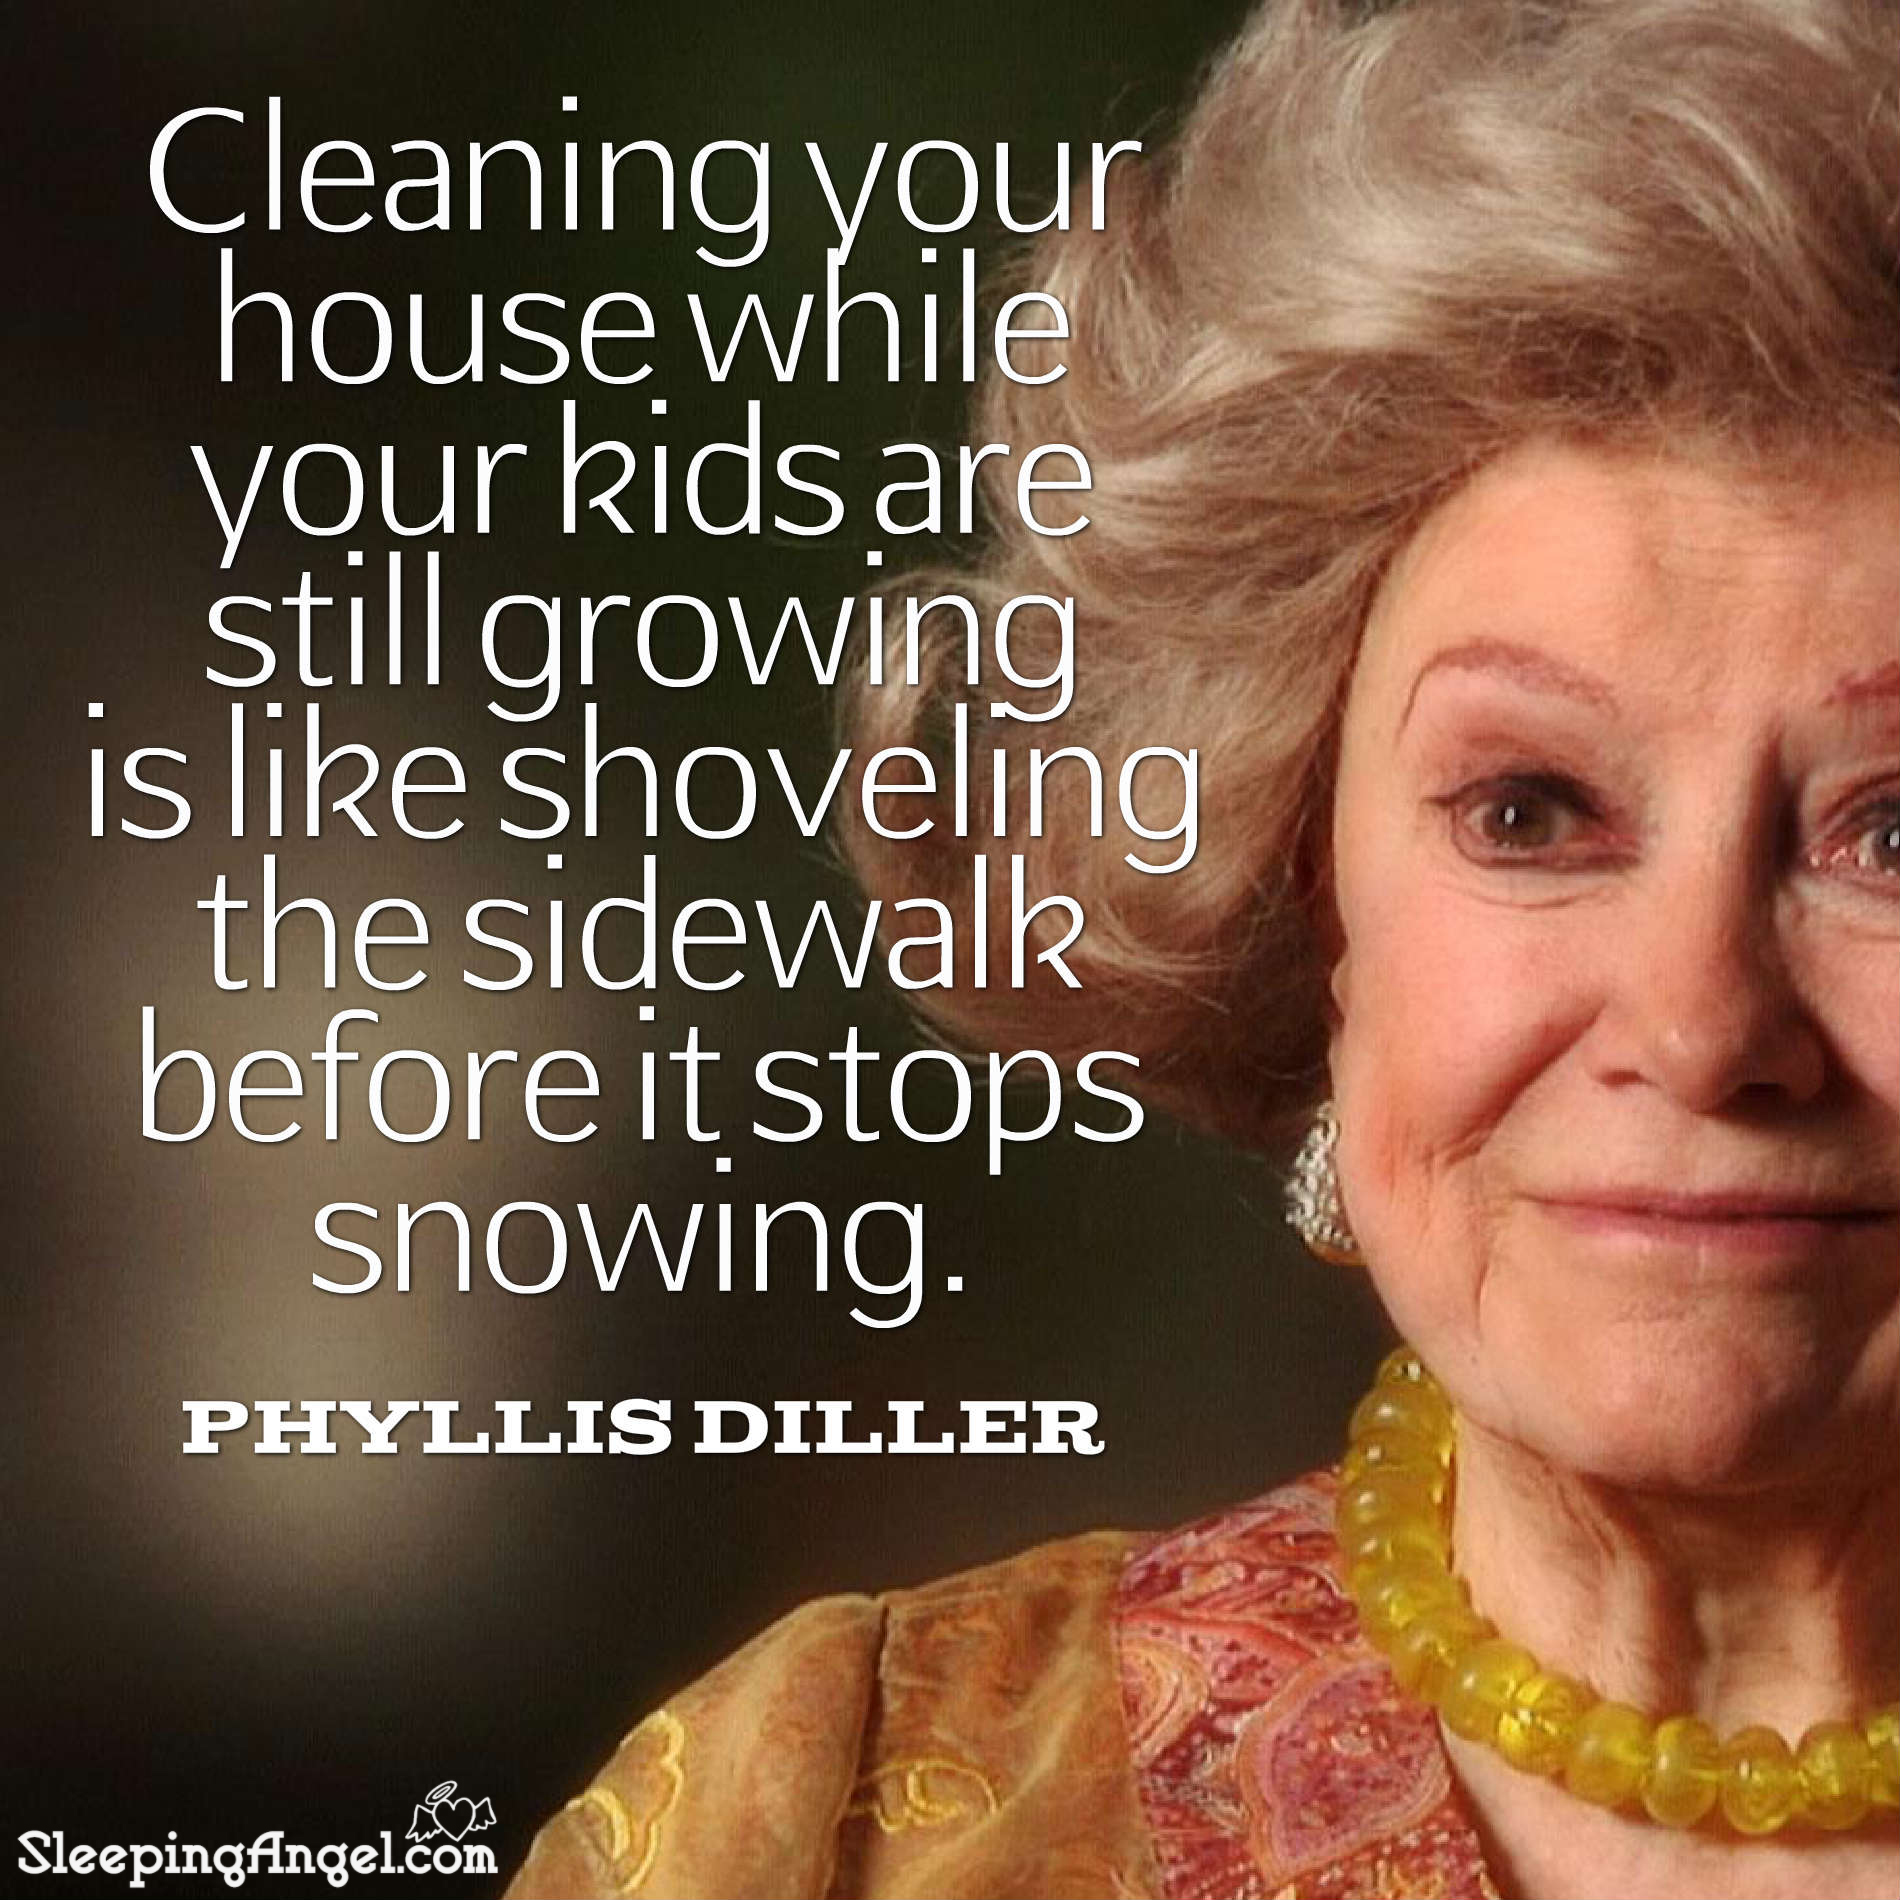 Phyllis Diller Quote